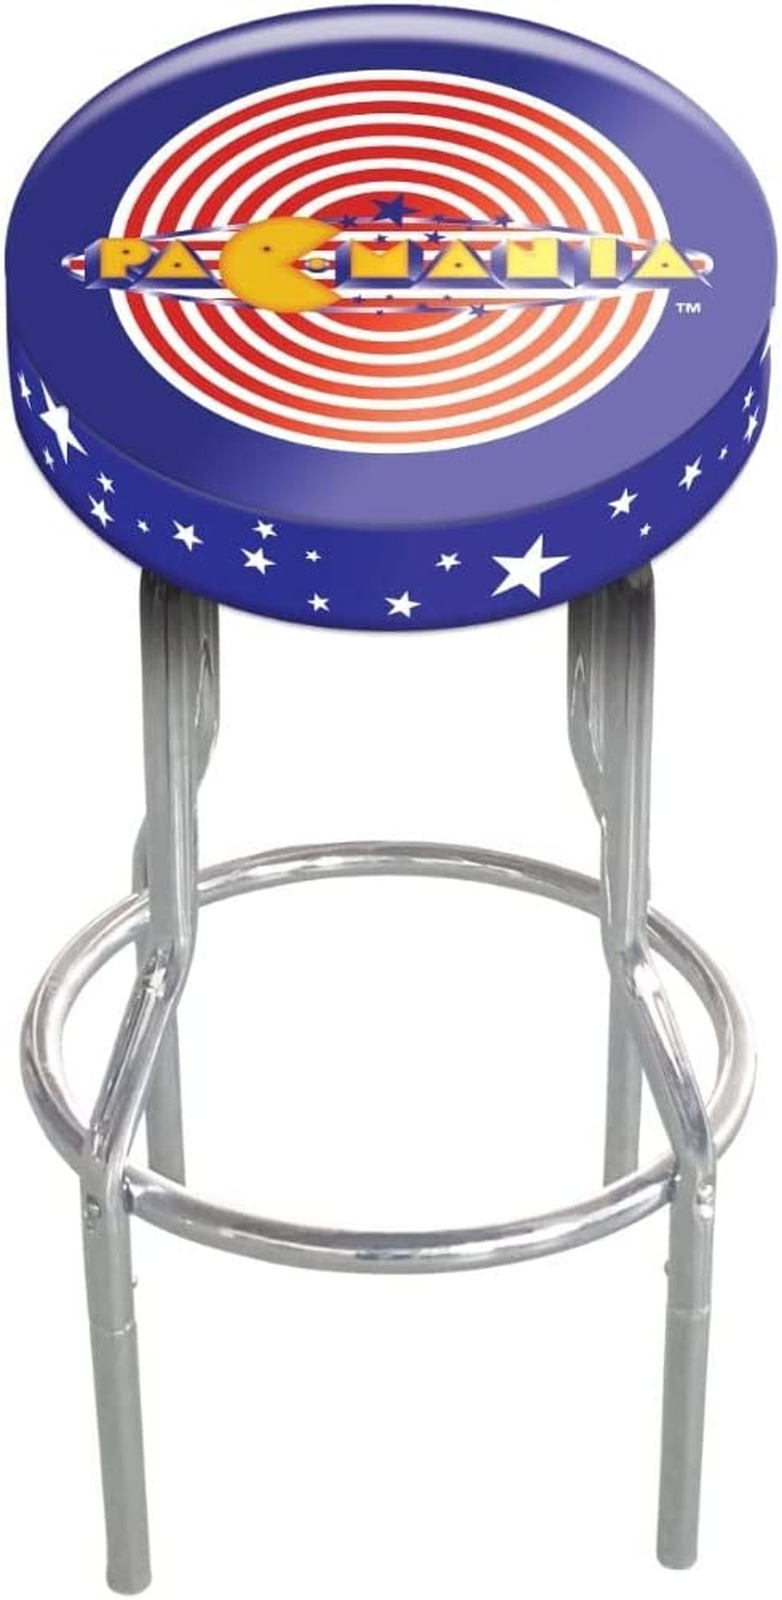 Stool Adjustable Height 21.5 Inches to 29.5 Inches (Pac Mania)